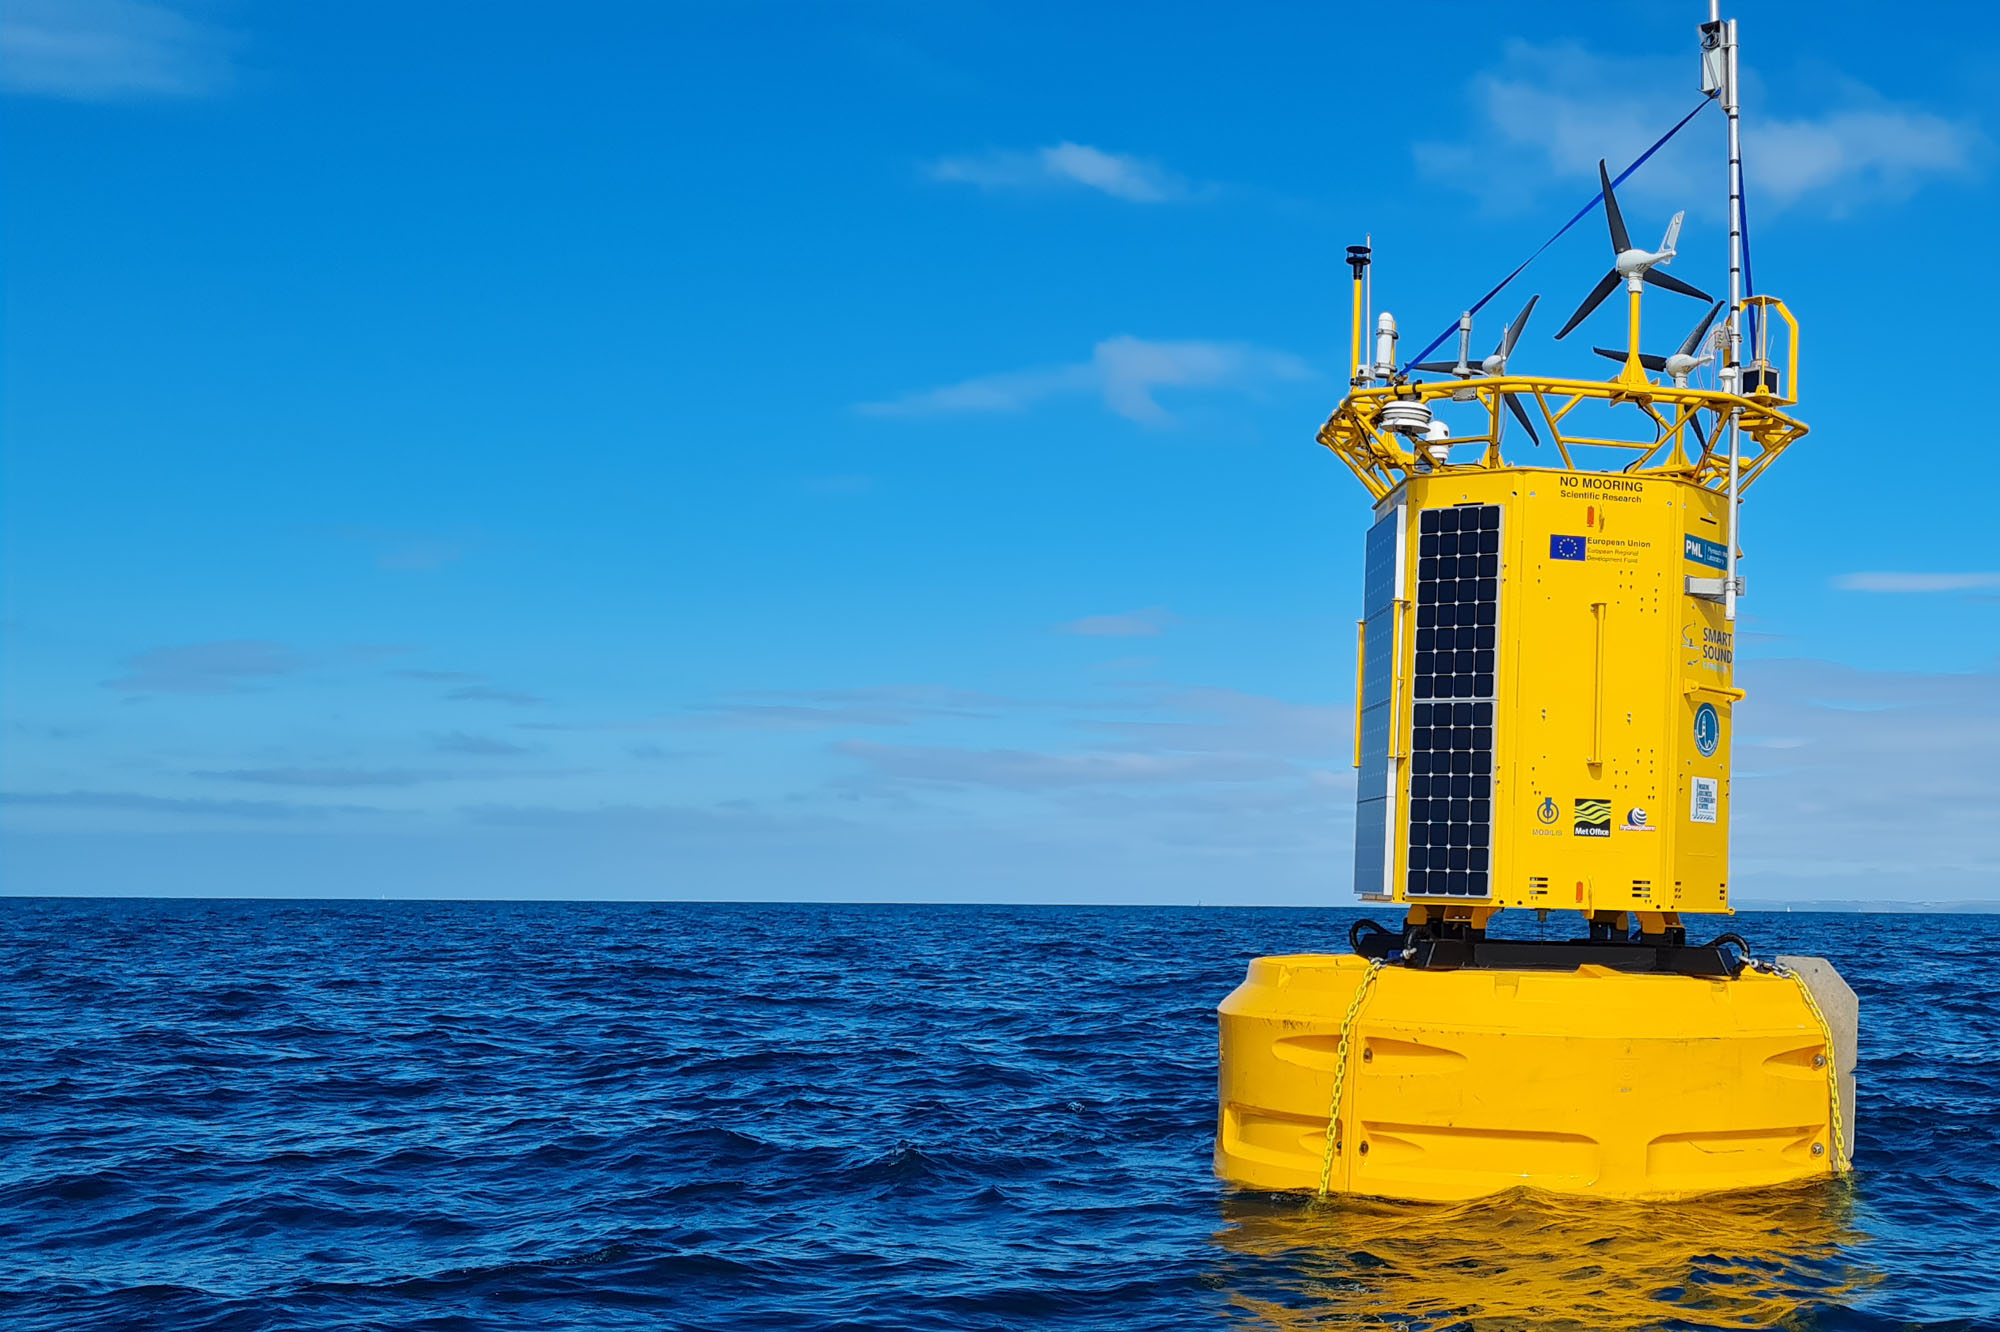 Data buoy pictured in the ocean